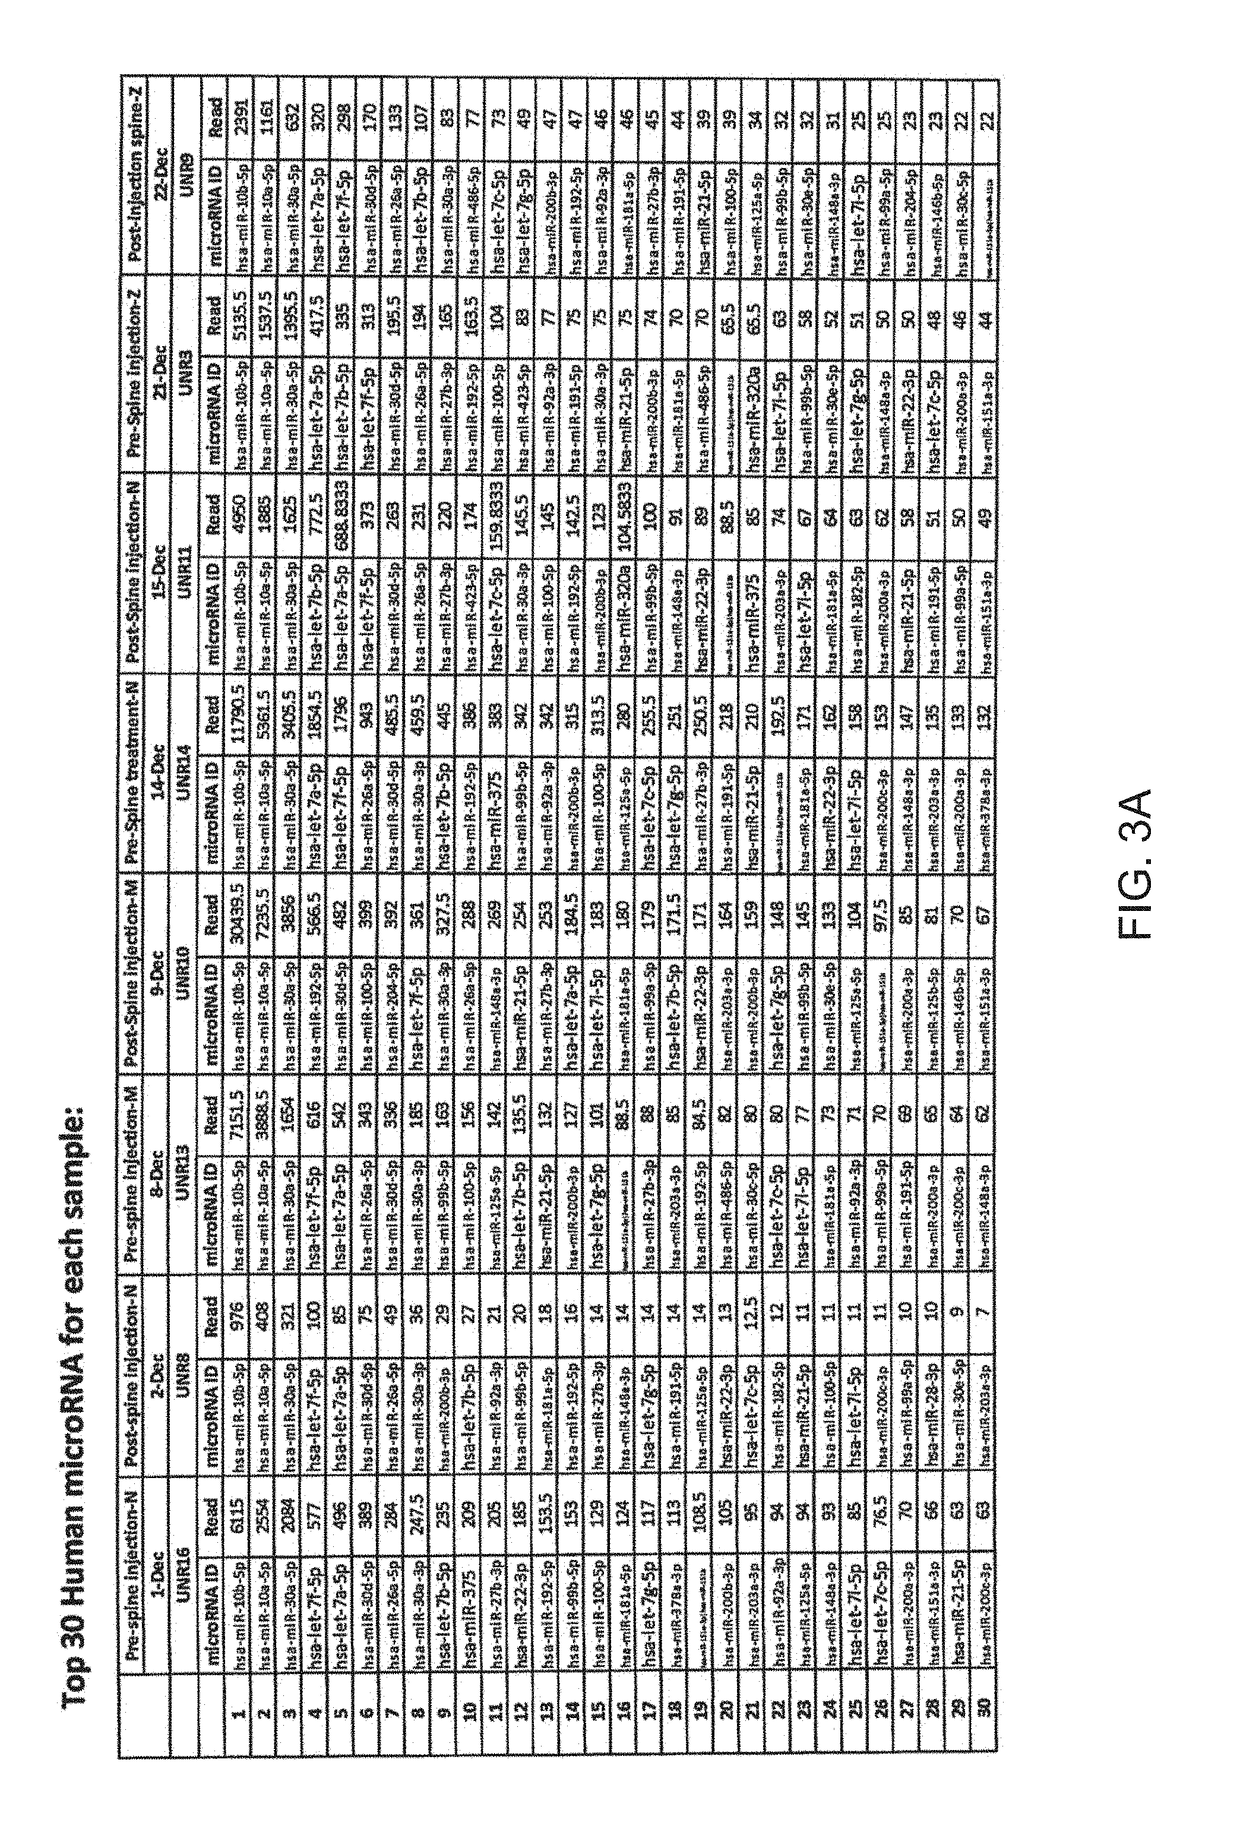 Micro-rna profiling, compositions, and methods of treating diseases